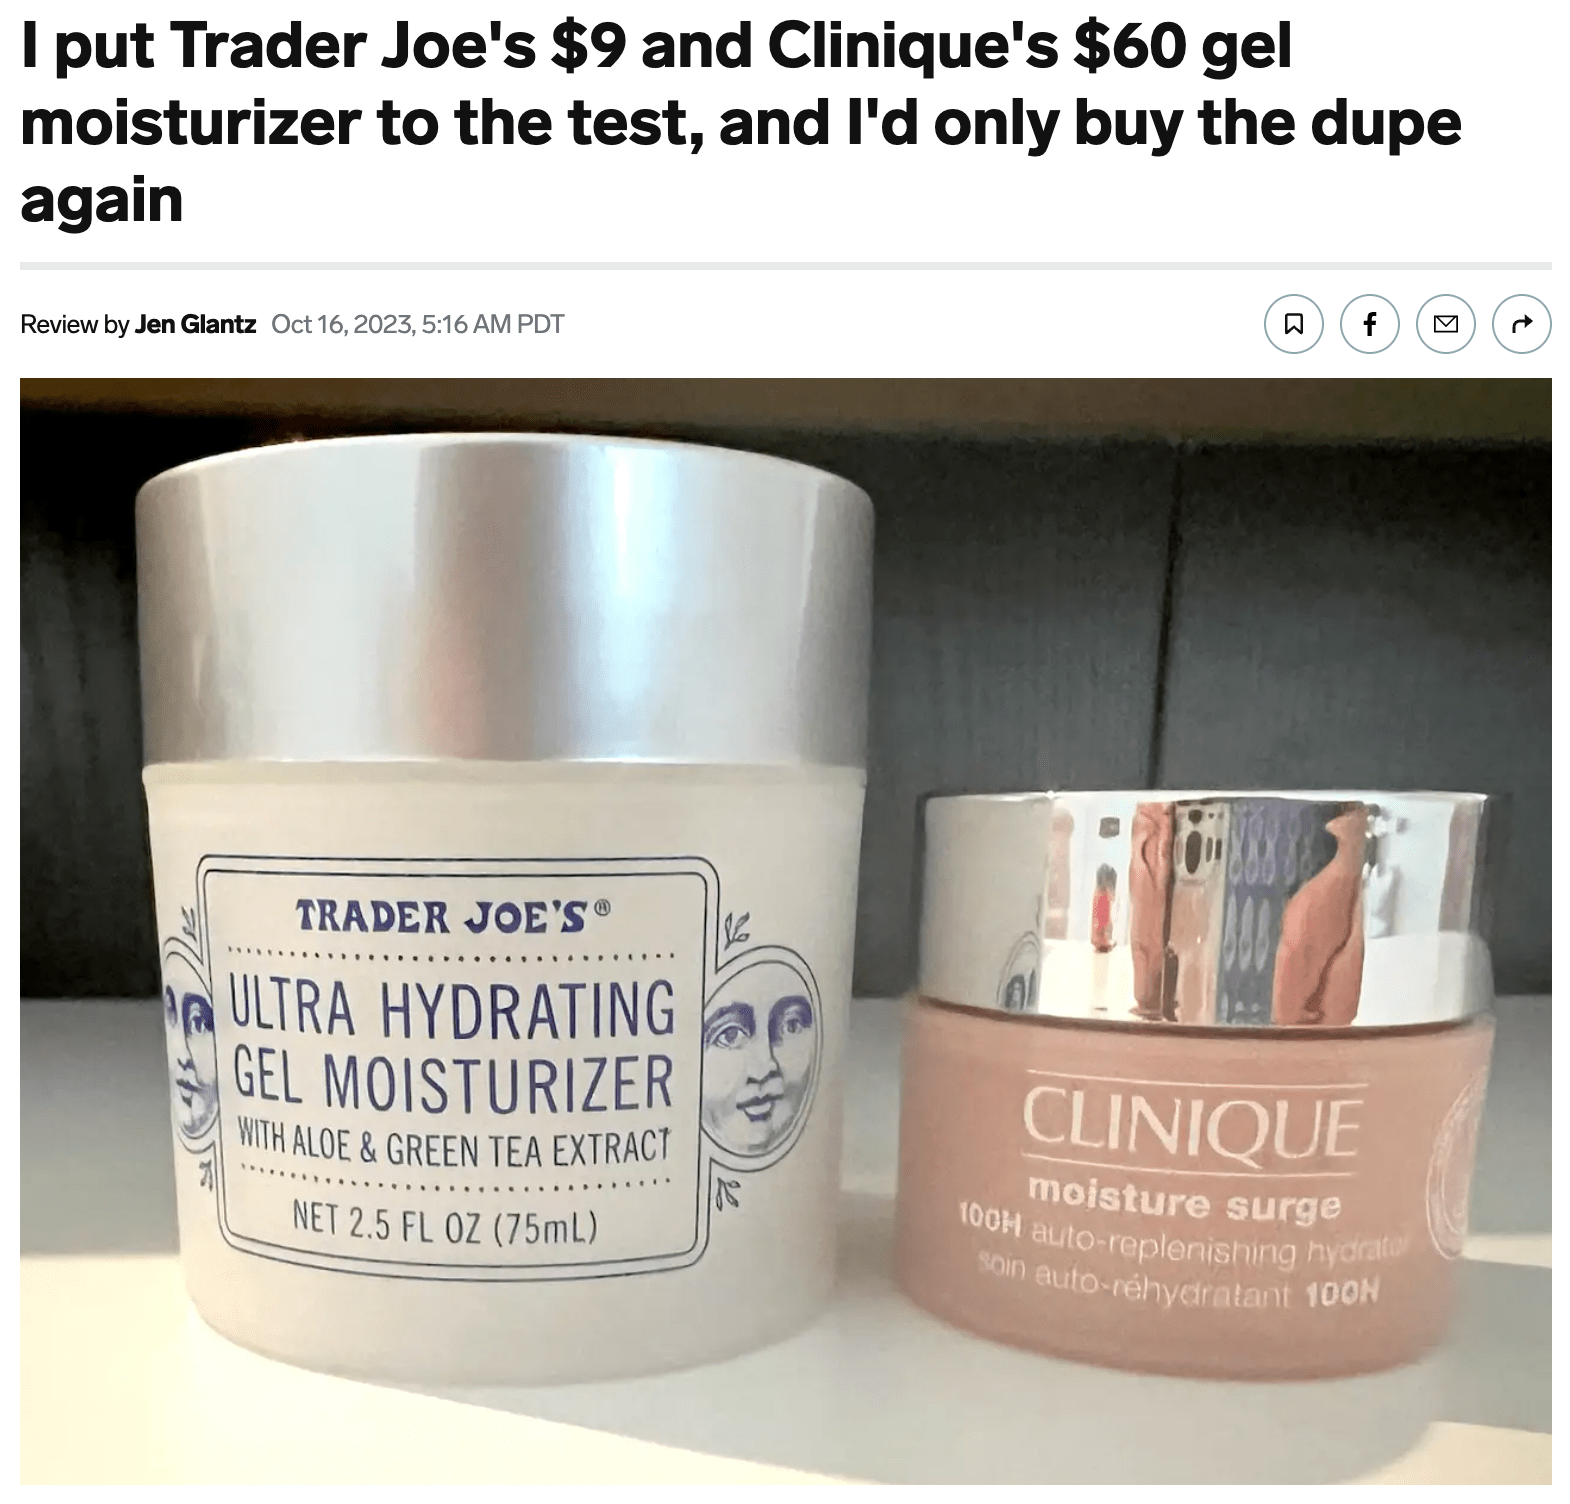 JUVA Skin & Laser Center Blog | Dr. Bruce Katz was featured in an Insider article about Clinique versus Trader Joe's skincare.